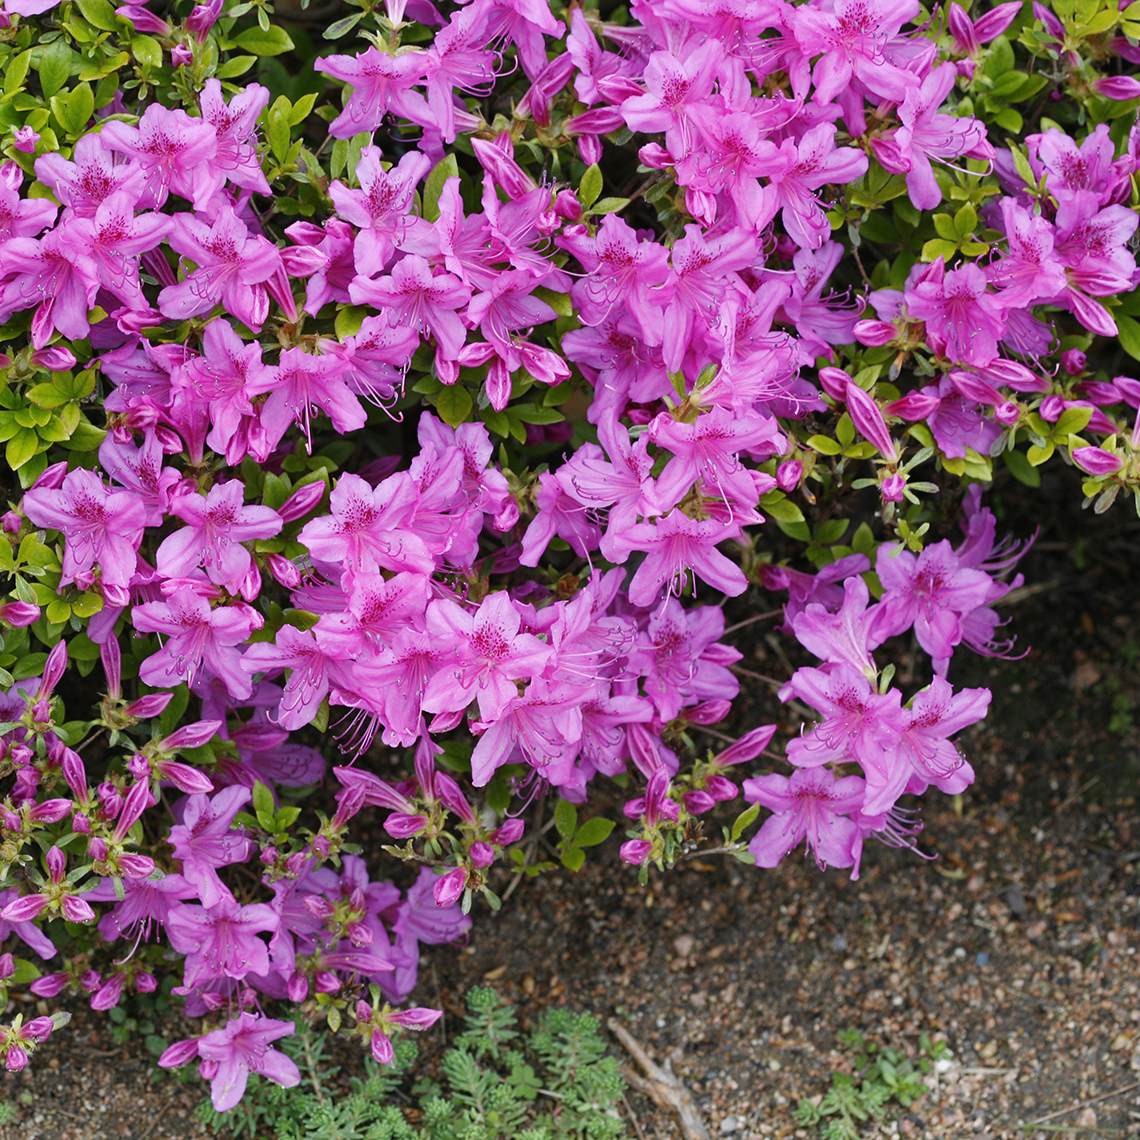 Lavender flowers of Rhododendron Compacta